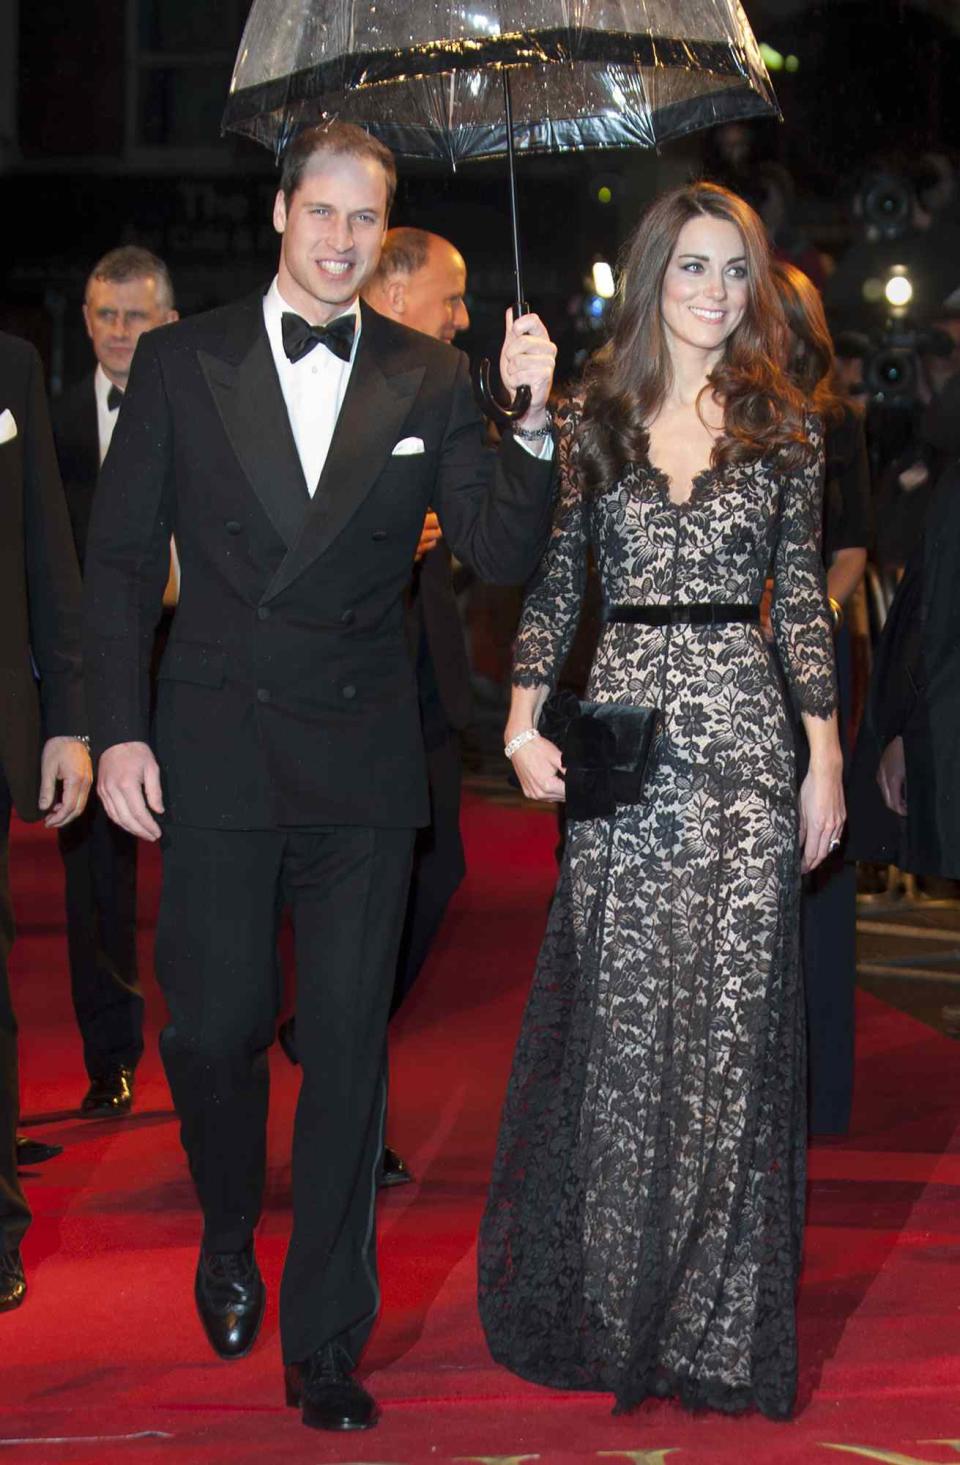 The Duke And Duchess Of Cambridge Arrive For The Uk Royal Film Premiere Of War Horse At The Odeon West End, London